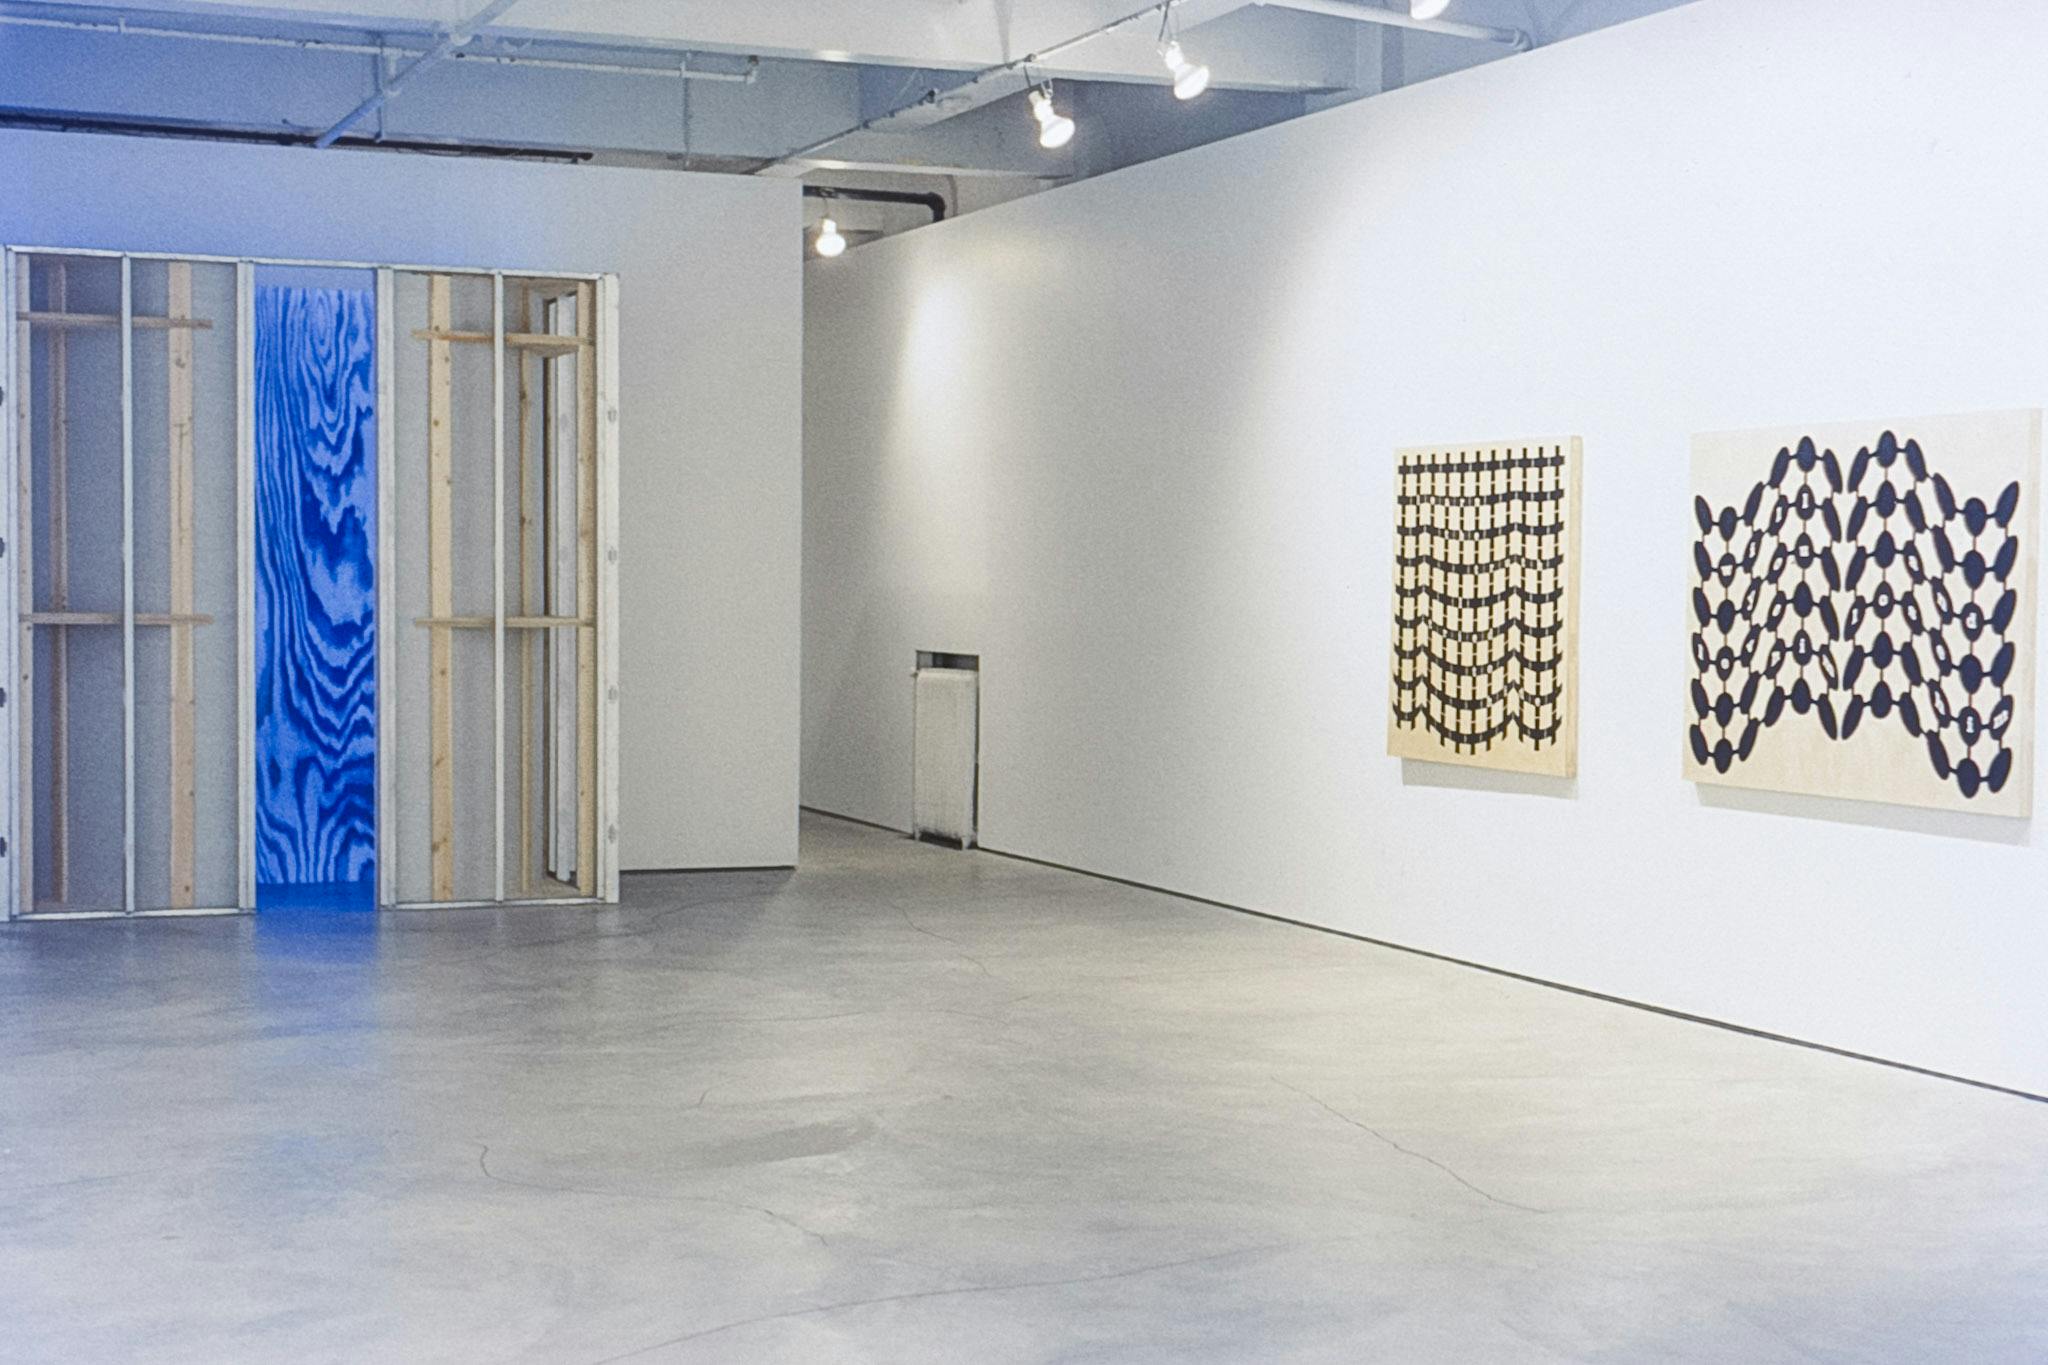 The corner of a gallery space with 3 artworks visible. One is a wooden structure that shows a large wood pattern inside, in blue. The other 2 works are wood panels with black geometric patterns. 